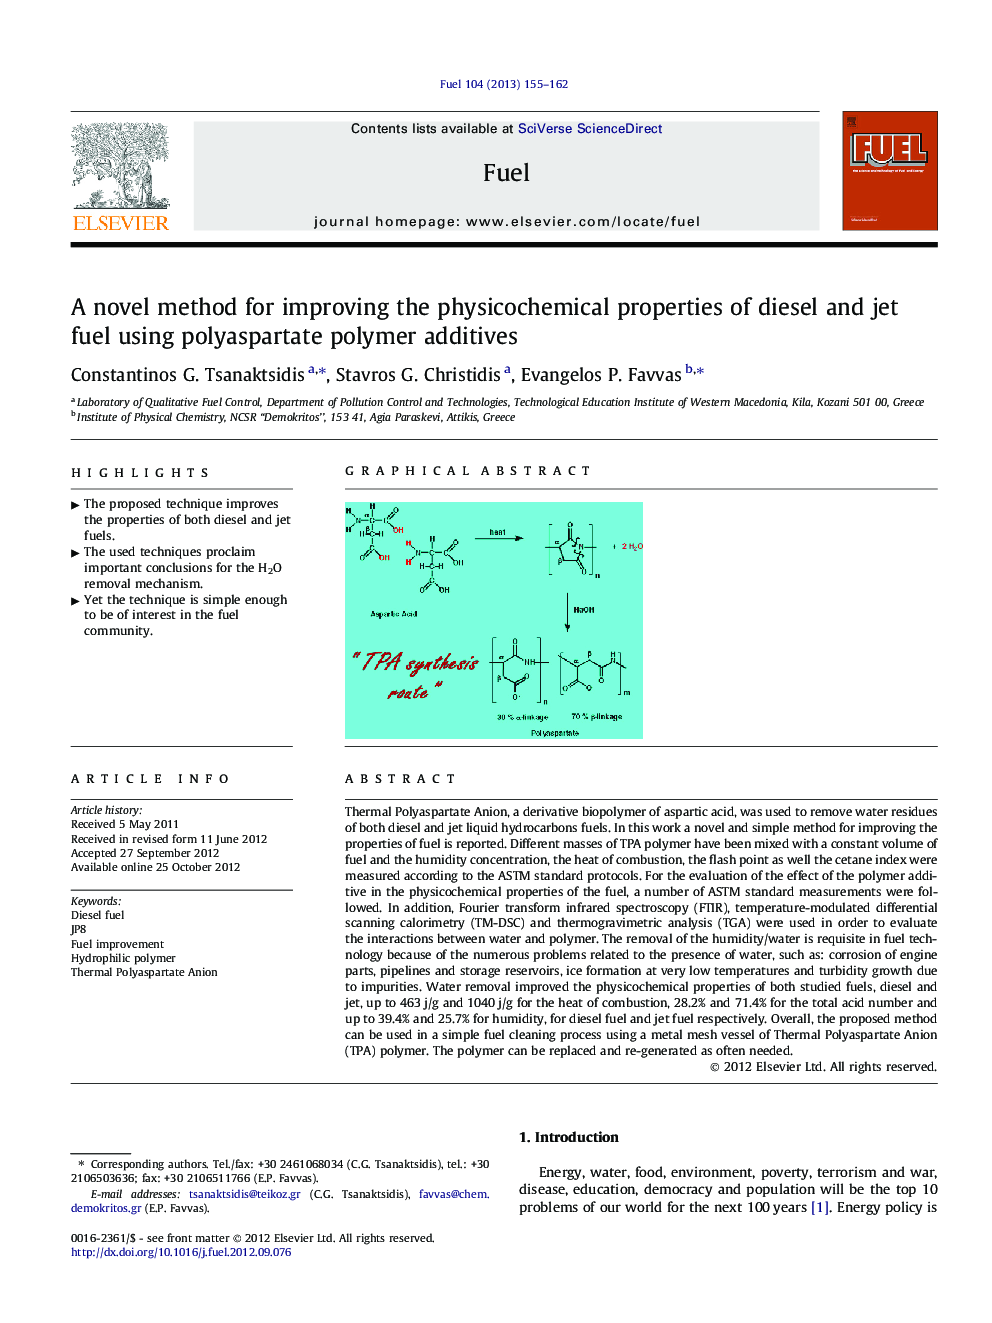 A novel method for improving the physicochemical properties of diesel and jet fuel using polyaspartate polymer additives